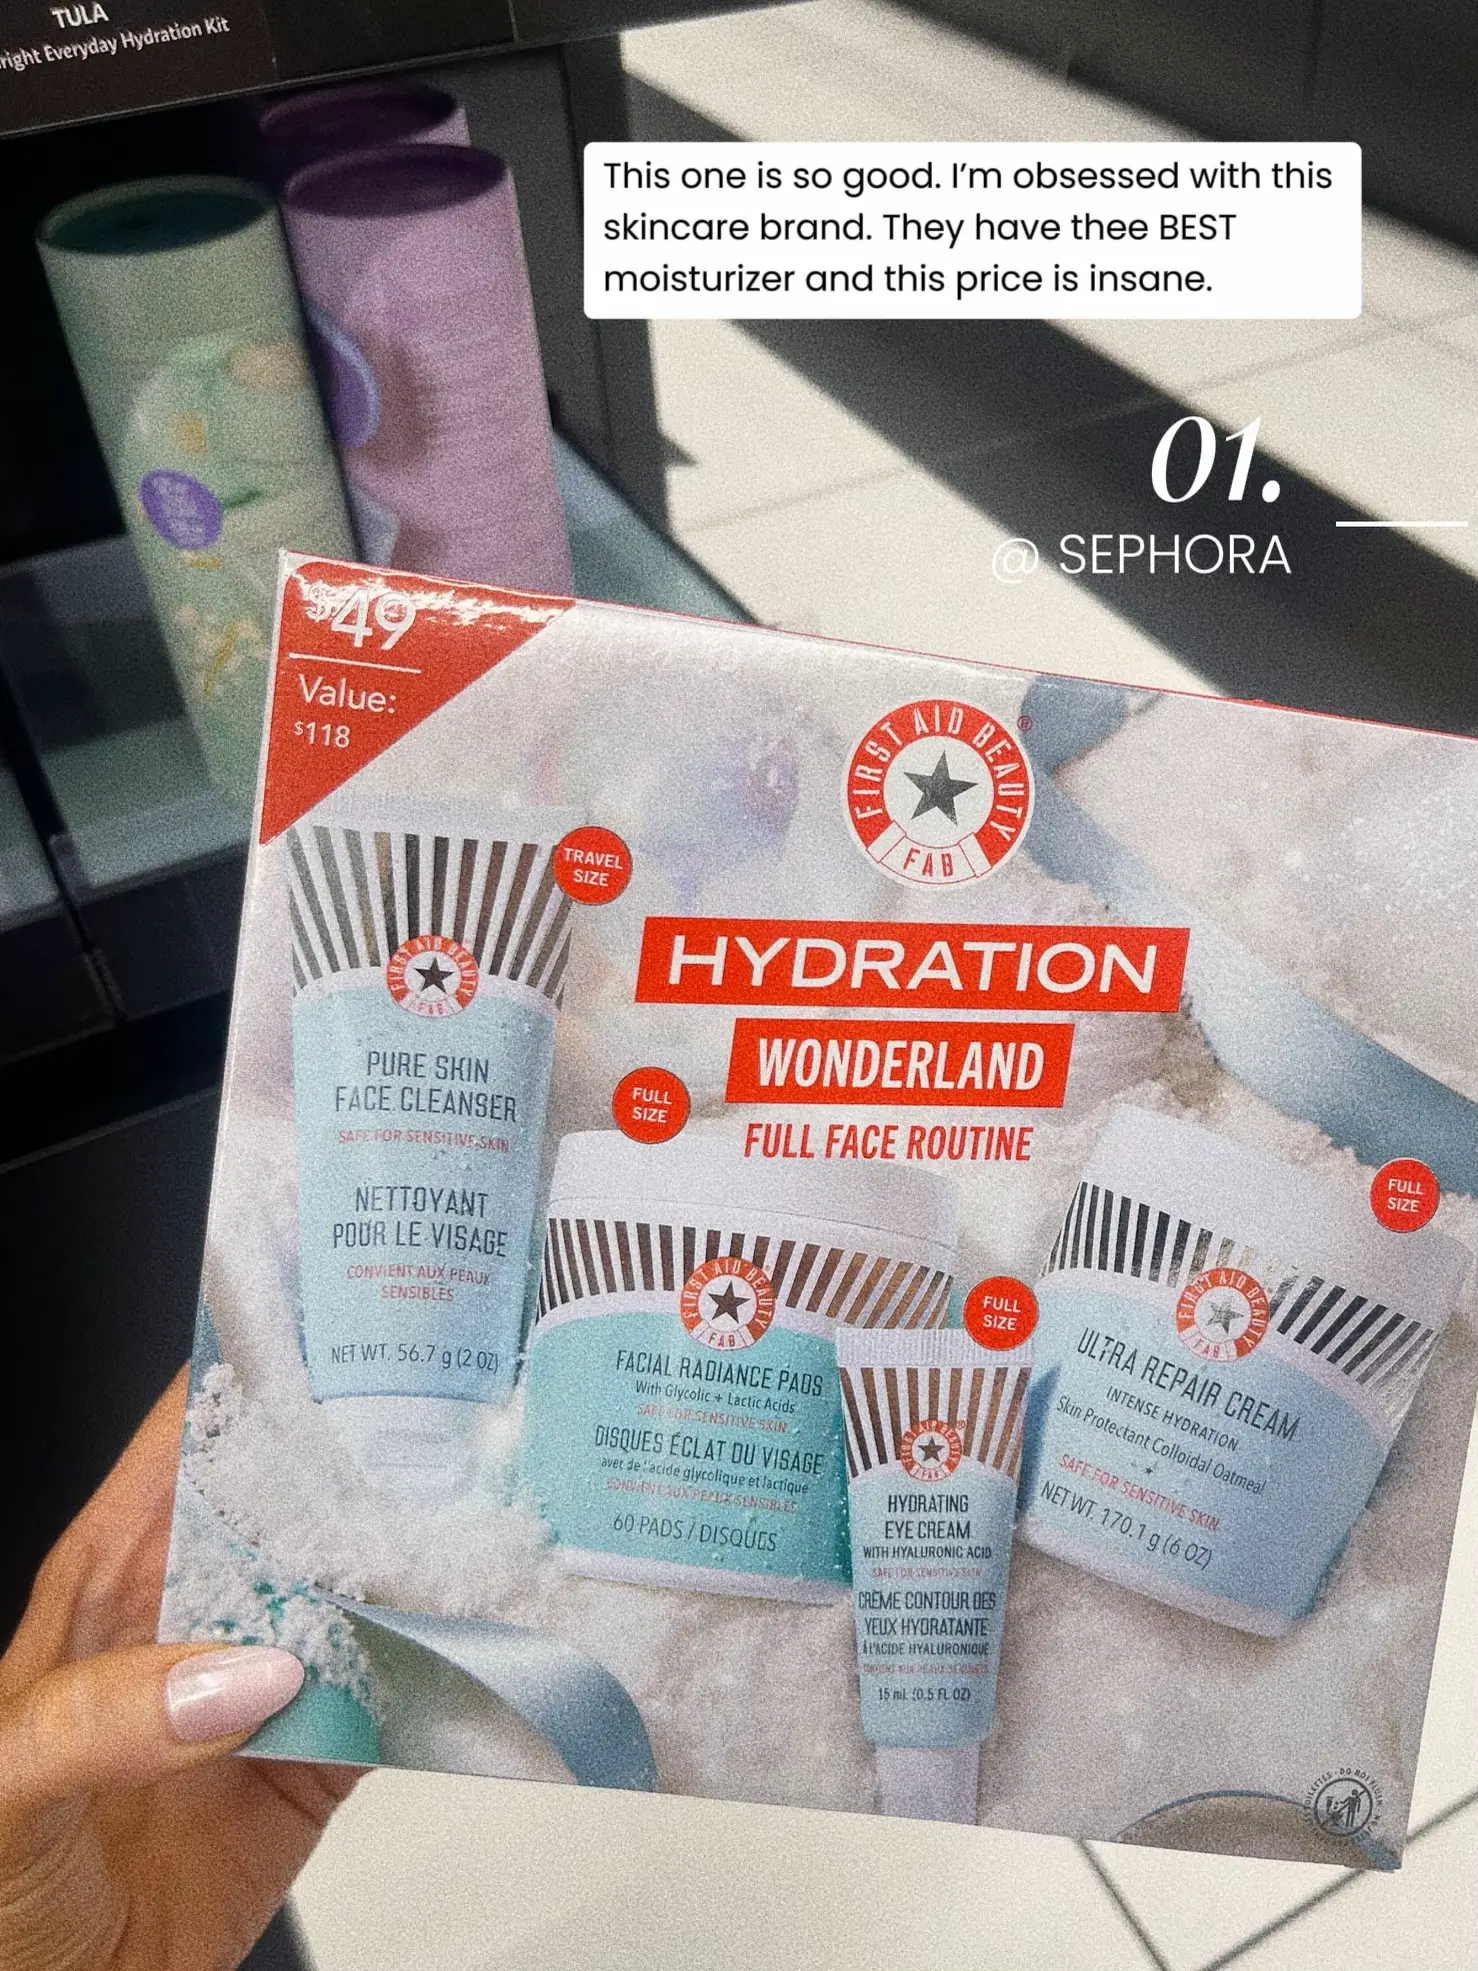  A person is holding a box of Hydration Wonders skincare